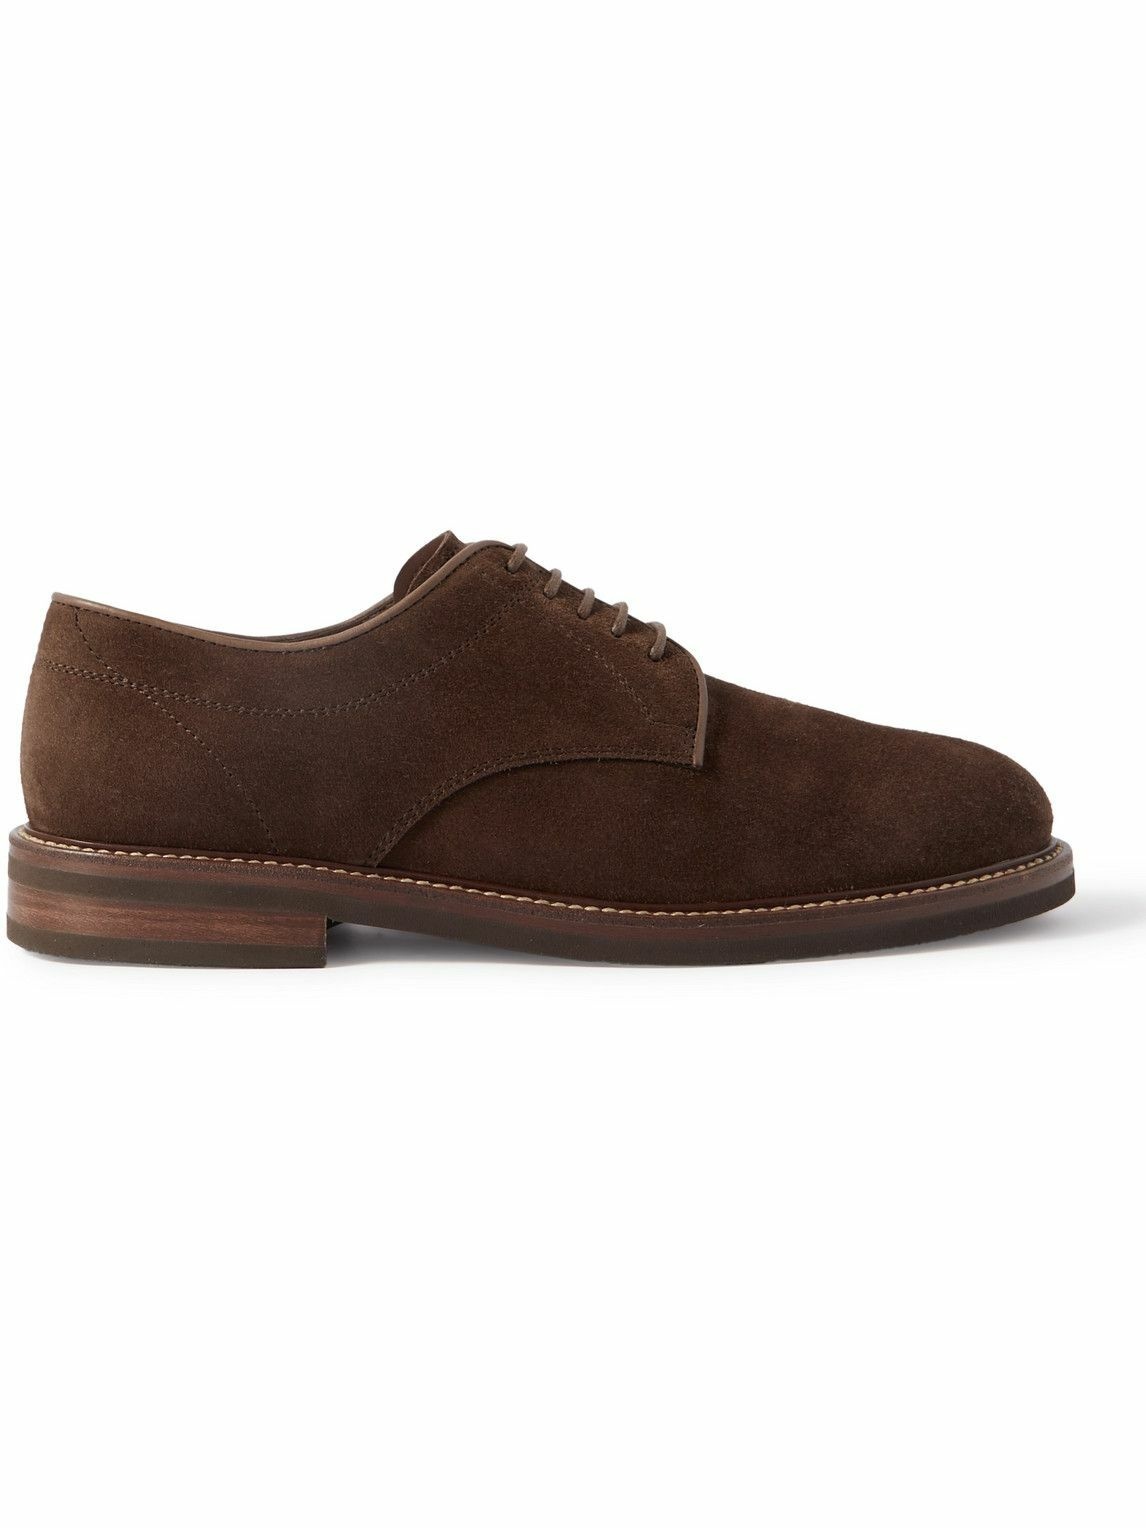 Brunello Cucinelli - Leather-Trimmed Suede Derby Shoes - Brown Brunello ...